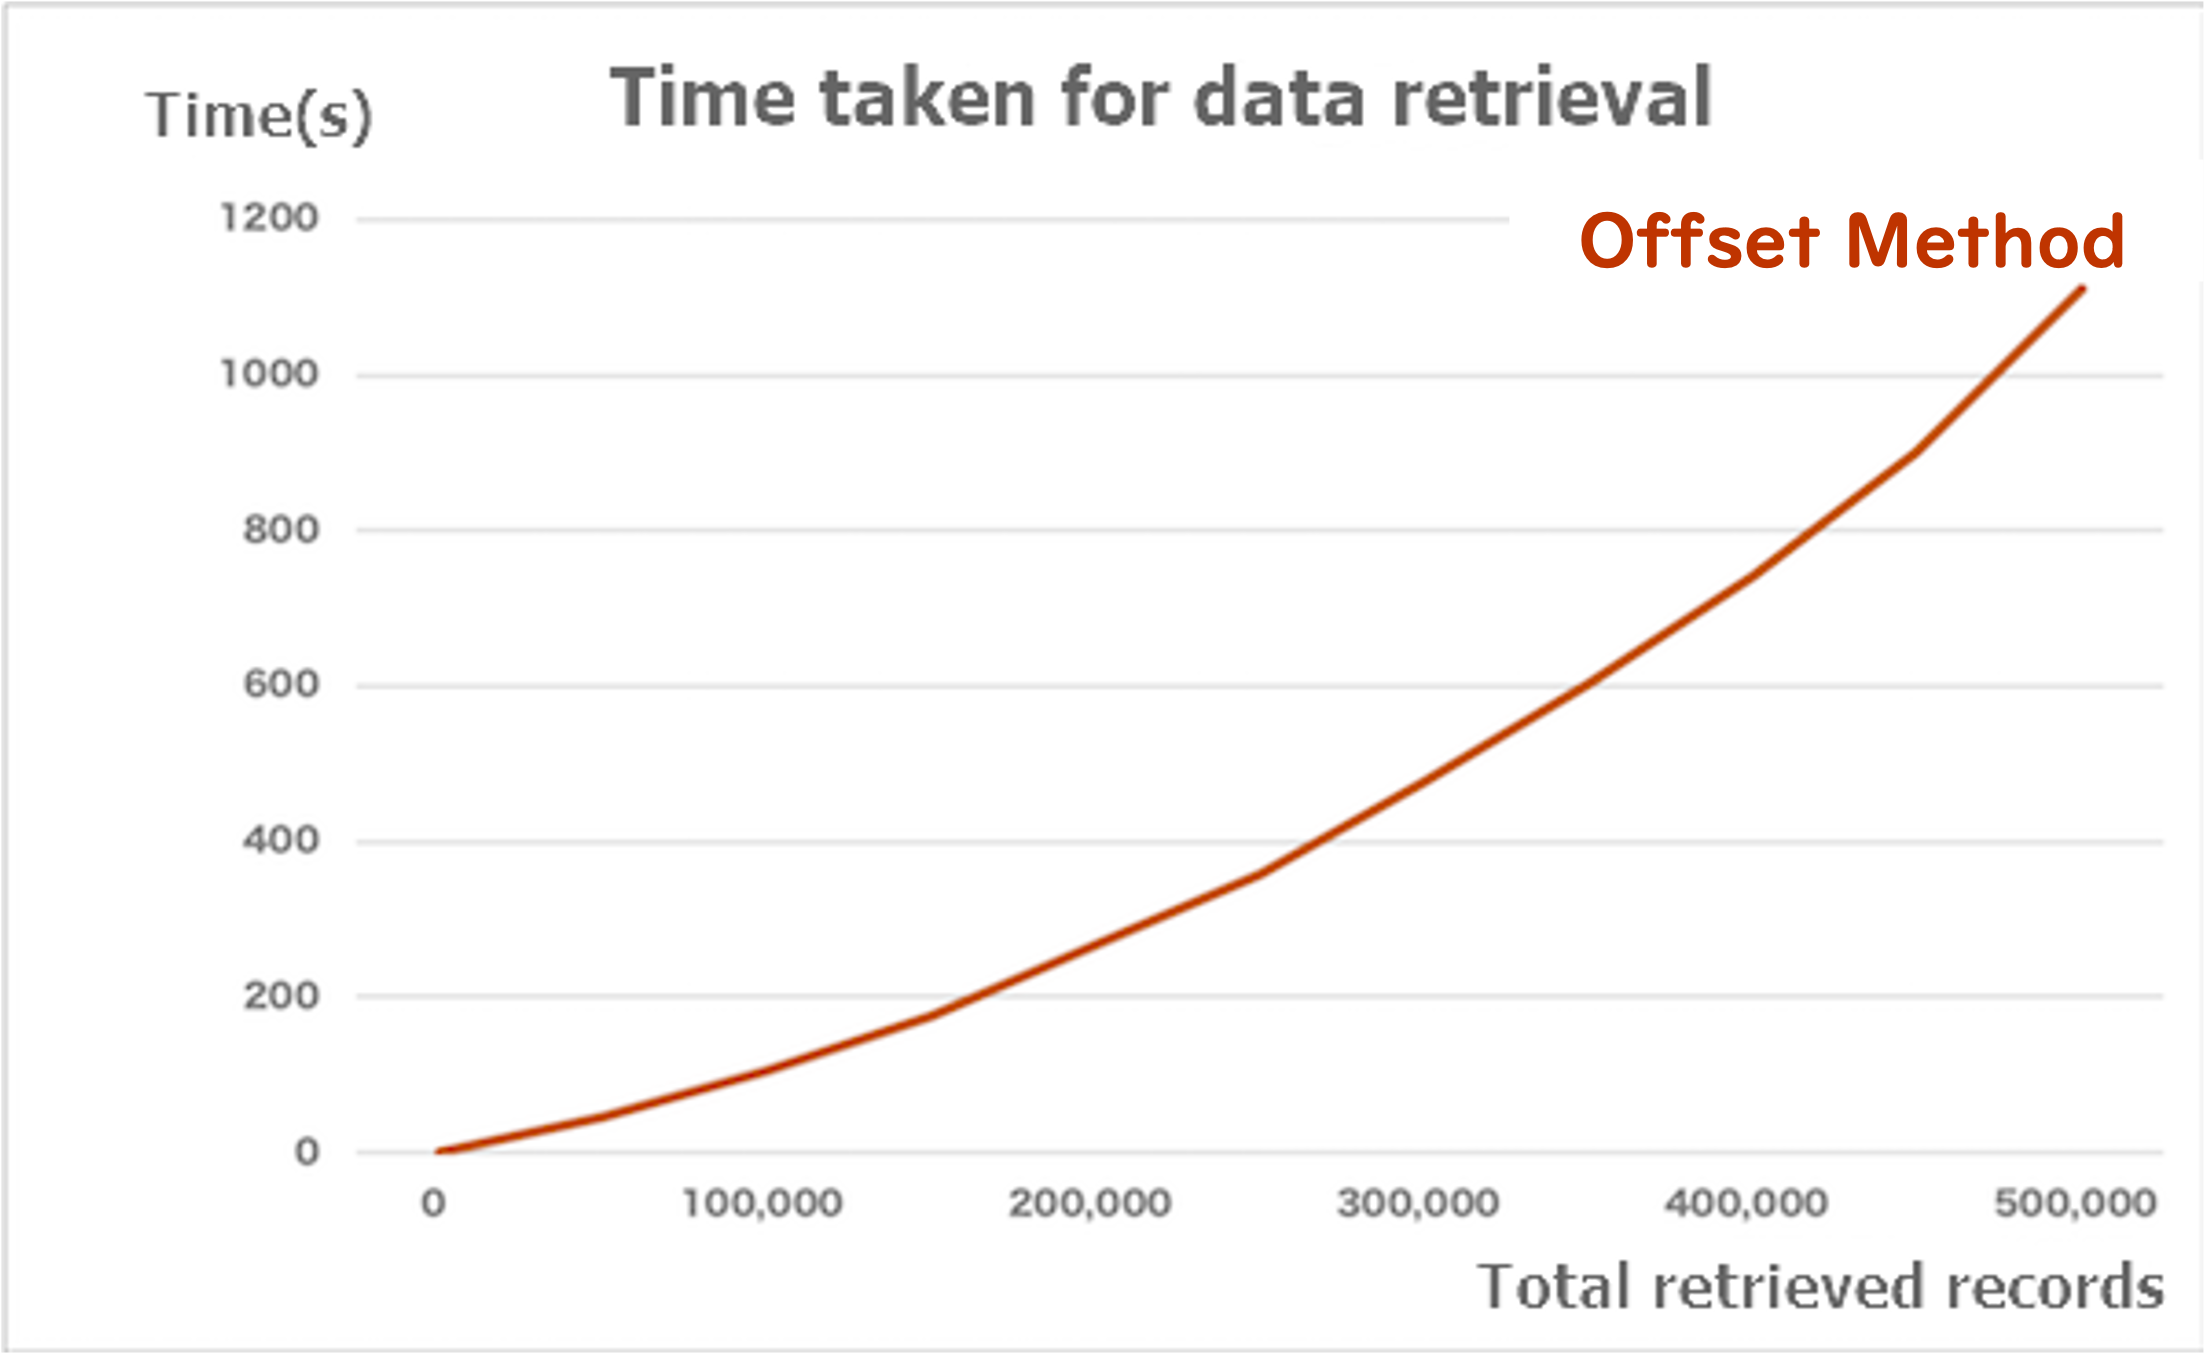 Chart: The total retrieved records against the time it took in seconds. The time it takes grows greatly as there are more records to retrieve.